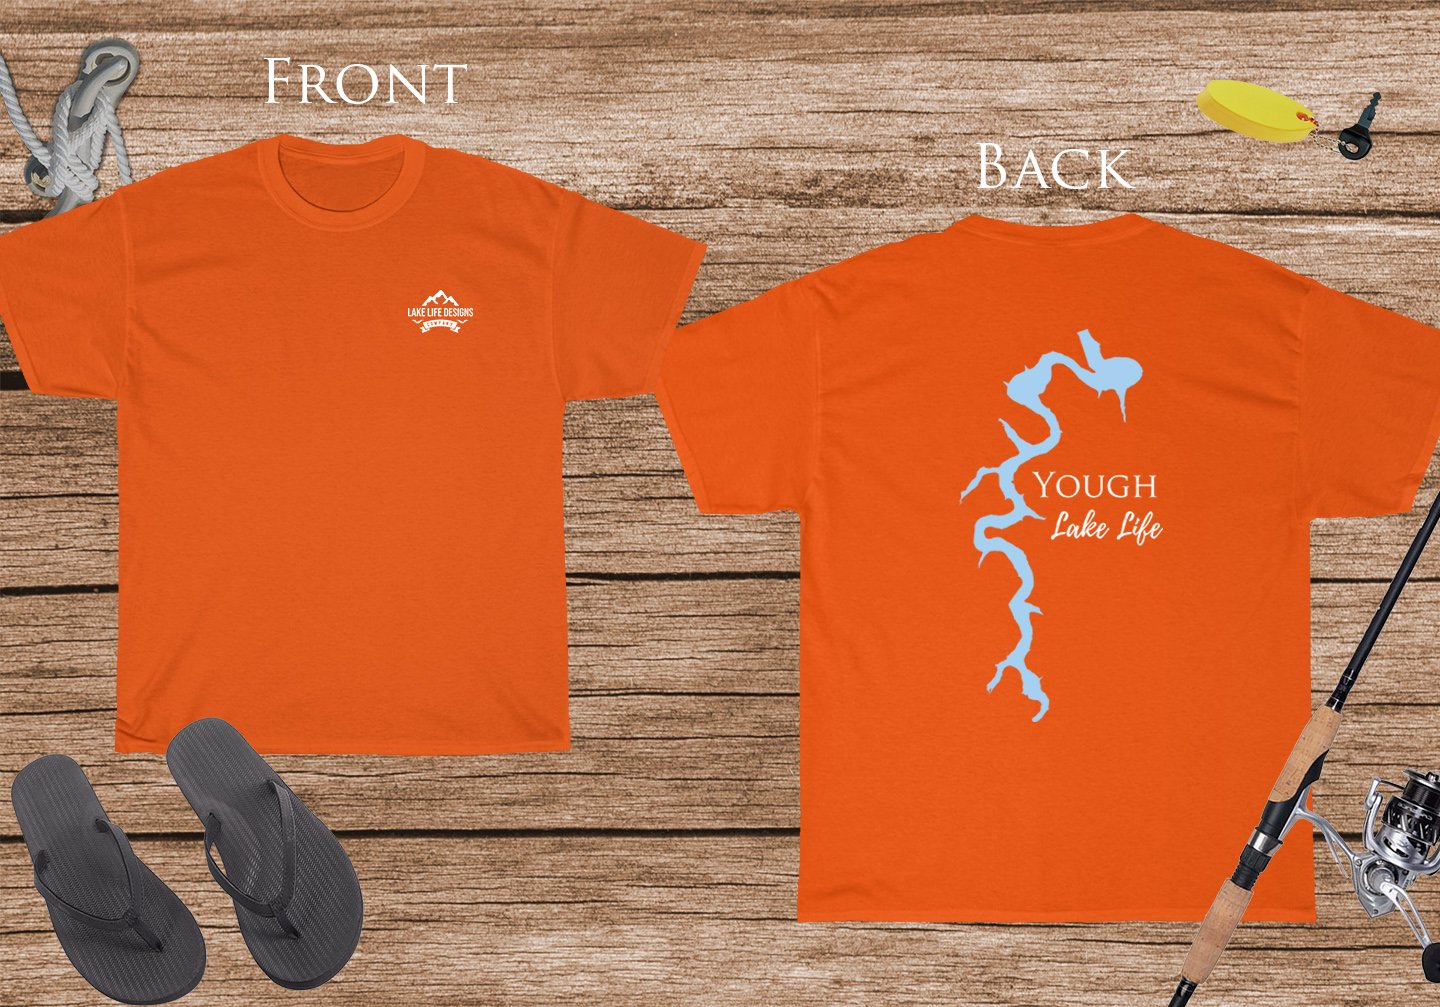 Yough Lake Life - Cotton Short Sleeved - FRONT & BACK PRINTED - Short Sleeved Cotton Tee - Maryland Lake